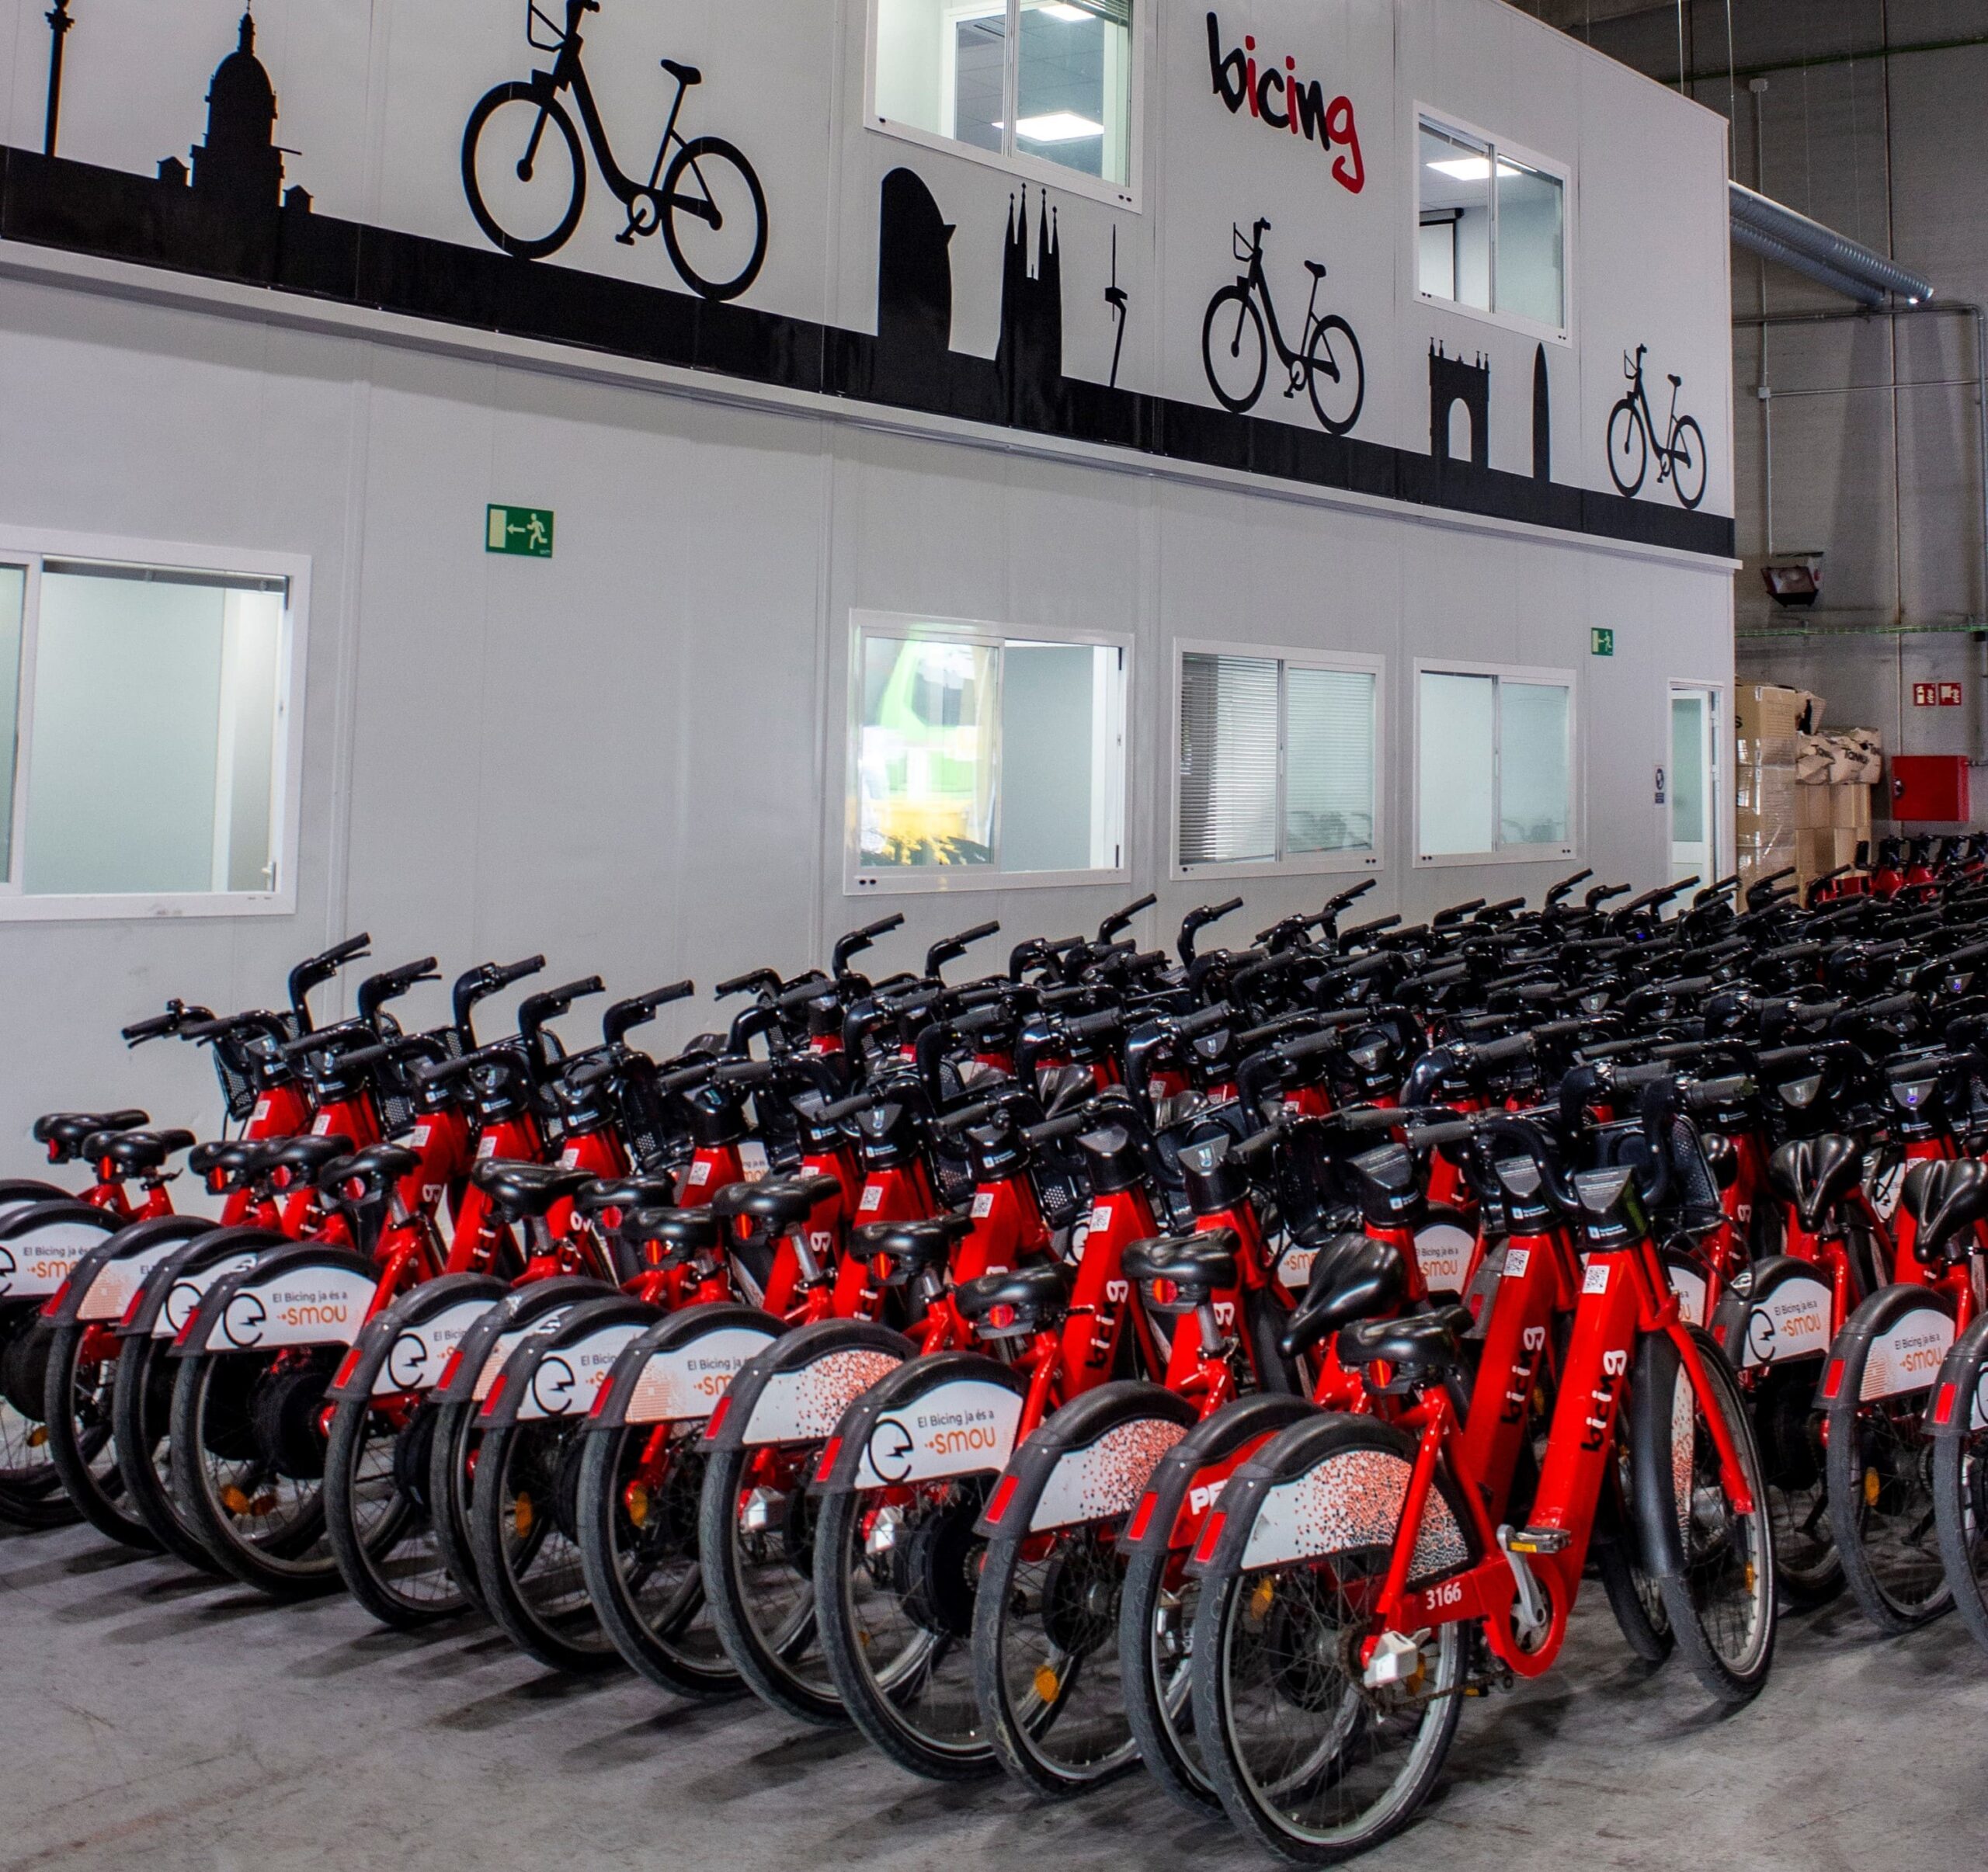 Bicing Barcelona fleet, bikes equipped with Tannus Tires